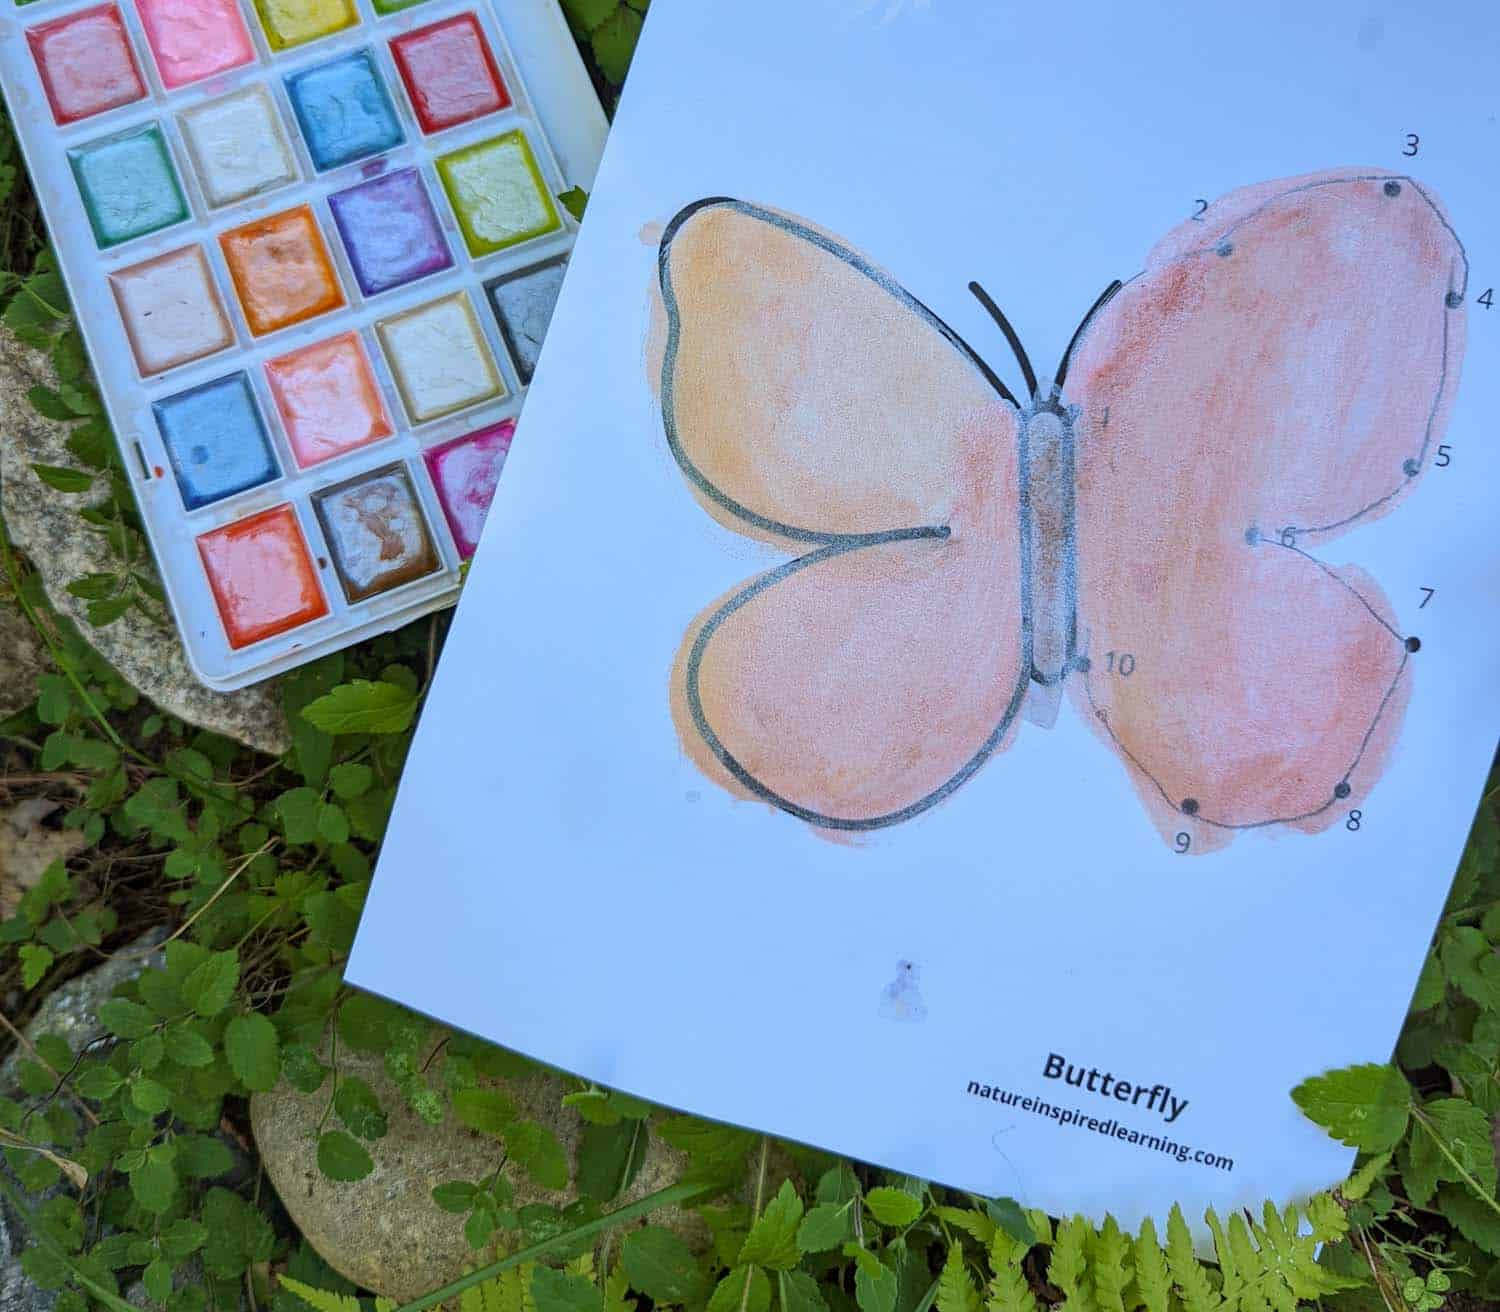 printed off an painted easy dot to dot worksheet with a simple butterfly design outside in the green foliage with a pearly paint set